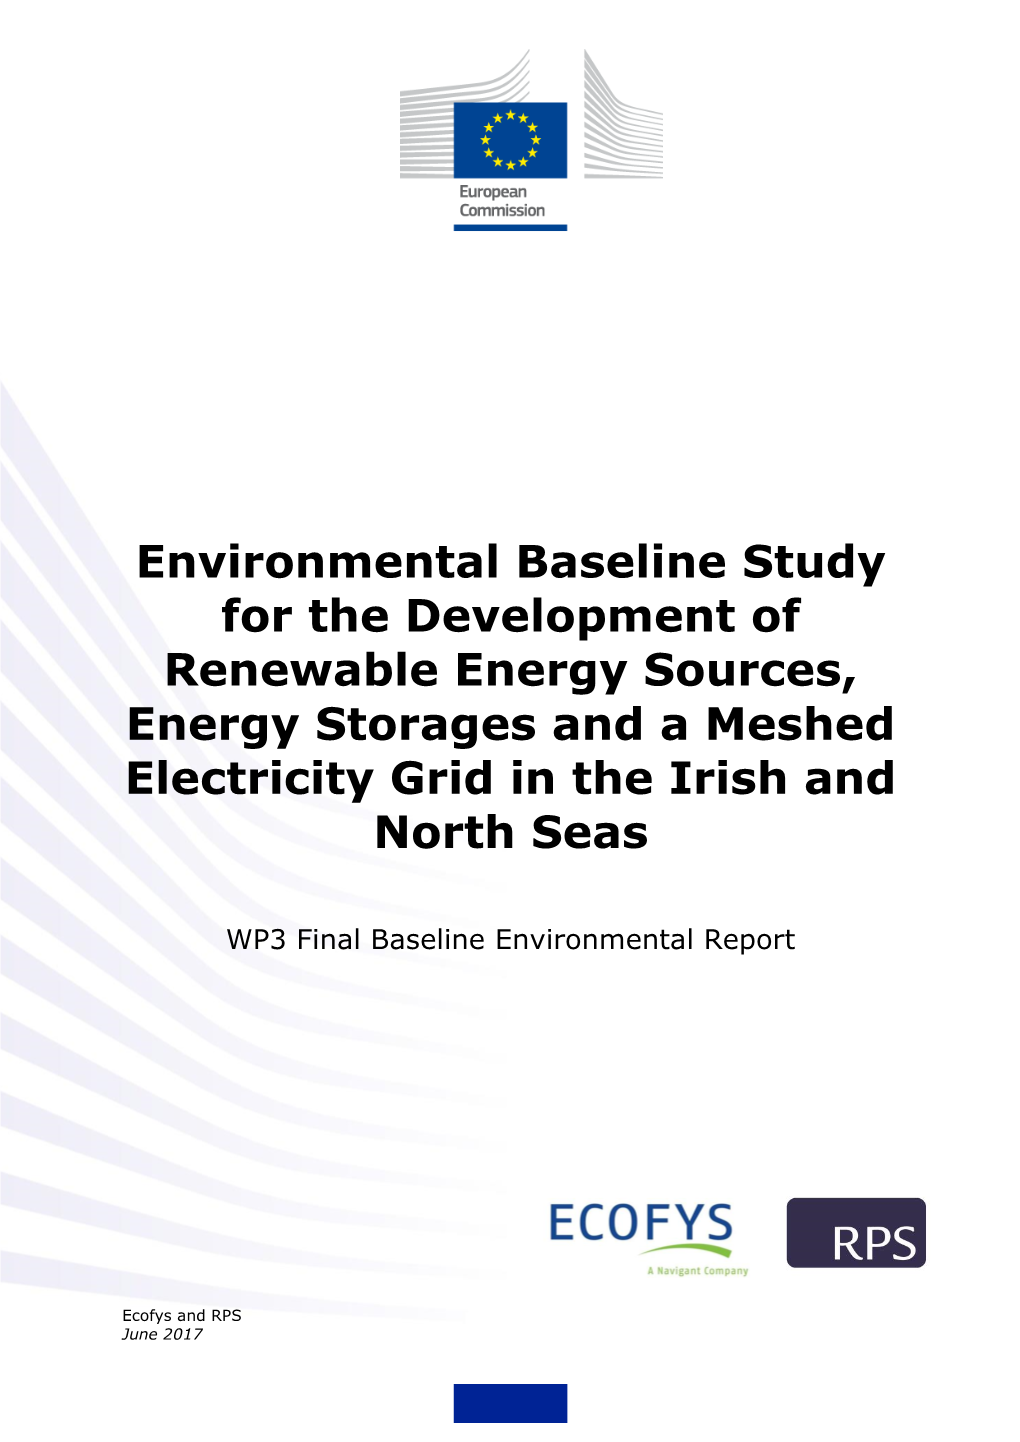 Environmental Baseline Study for the Development of Renewable Energy Sources, Energy Storages and a Meshed Electricity Grid in the Irish and North Seas